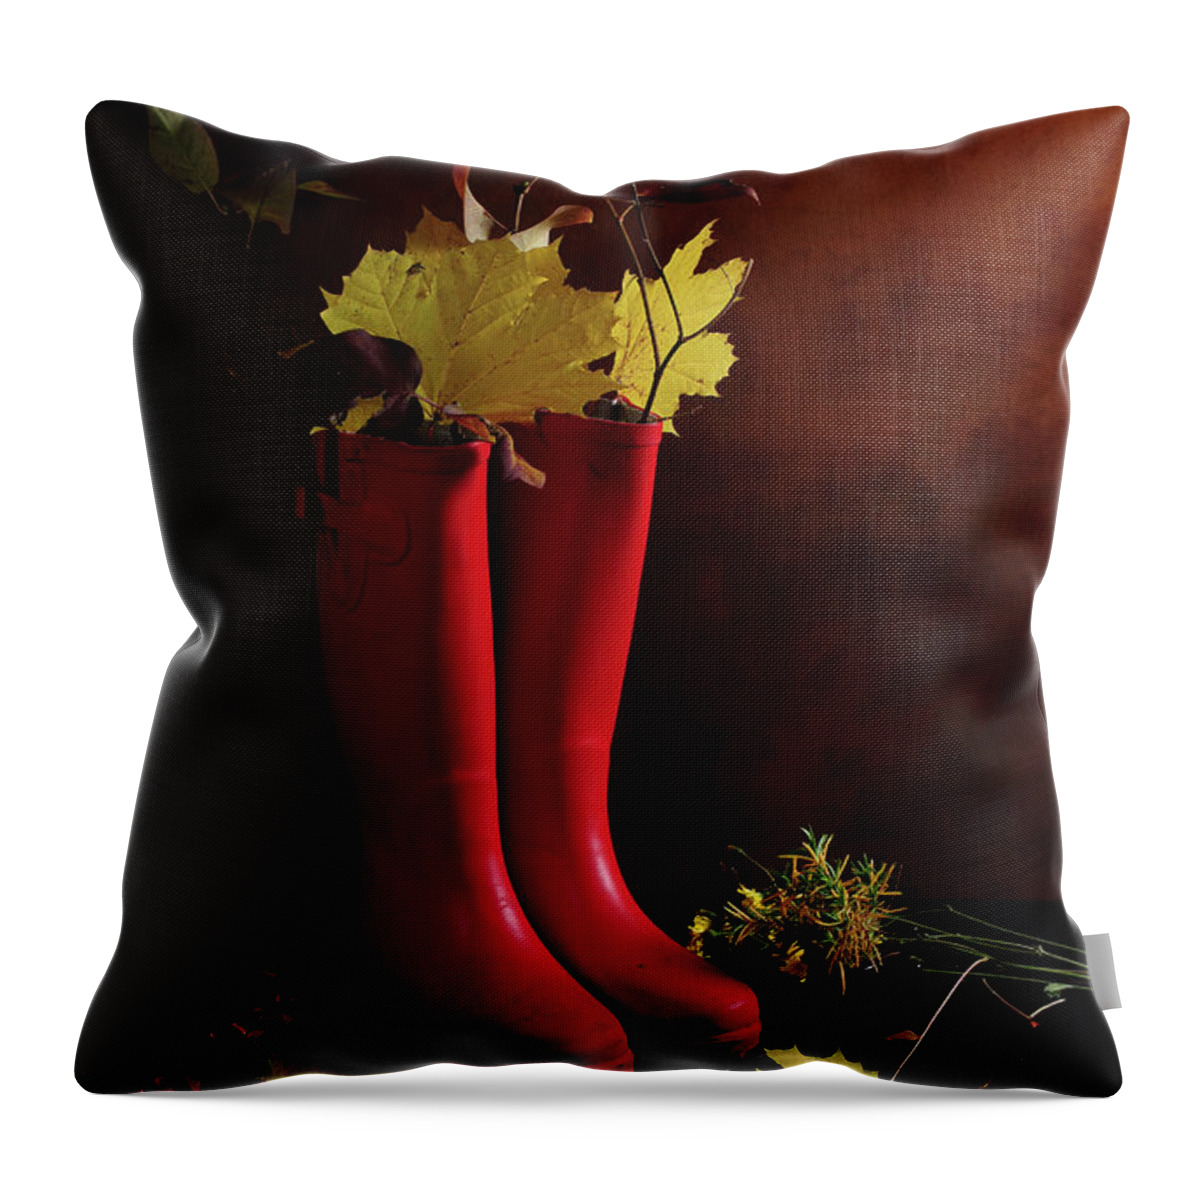 Girly Throw Pillow featuring the photograph My Boots are Cool by Randi Grace Nilsberg